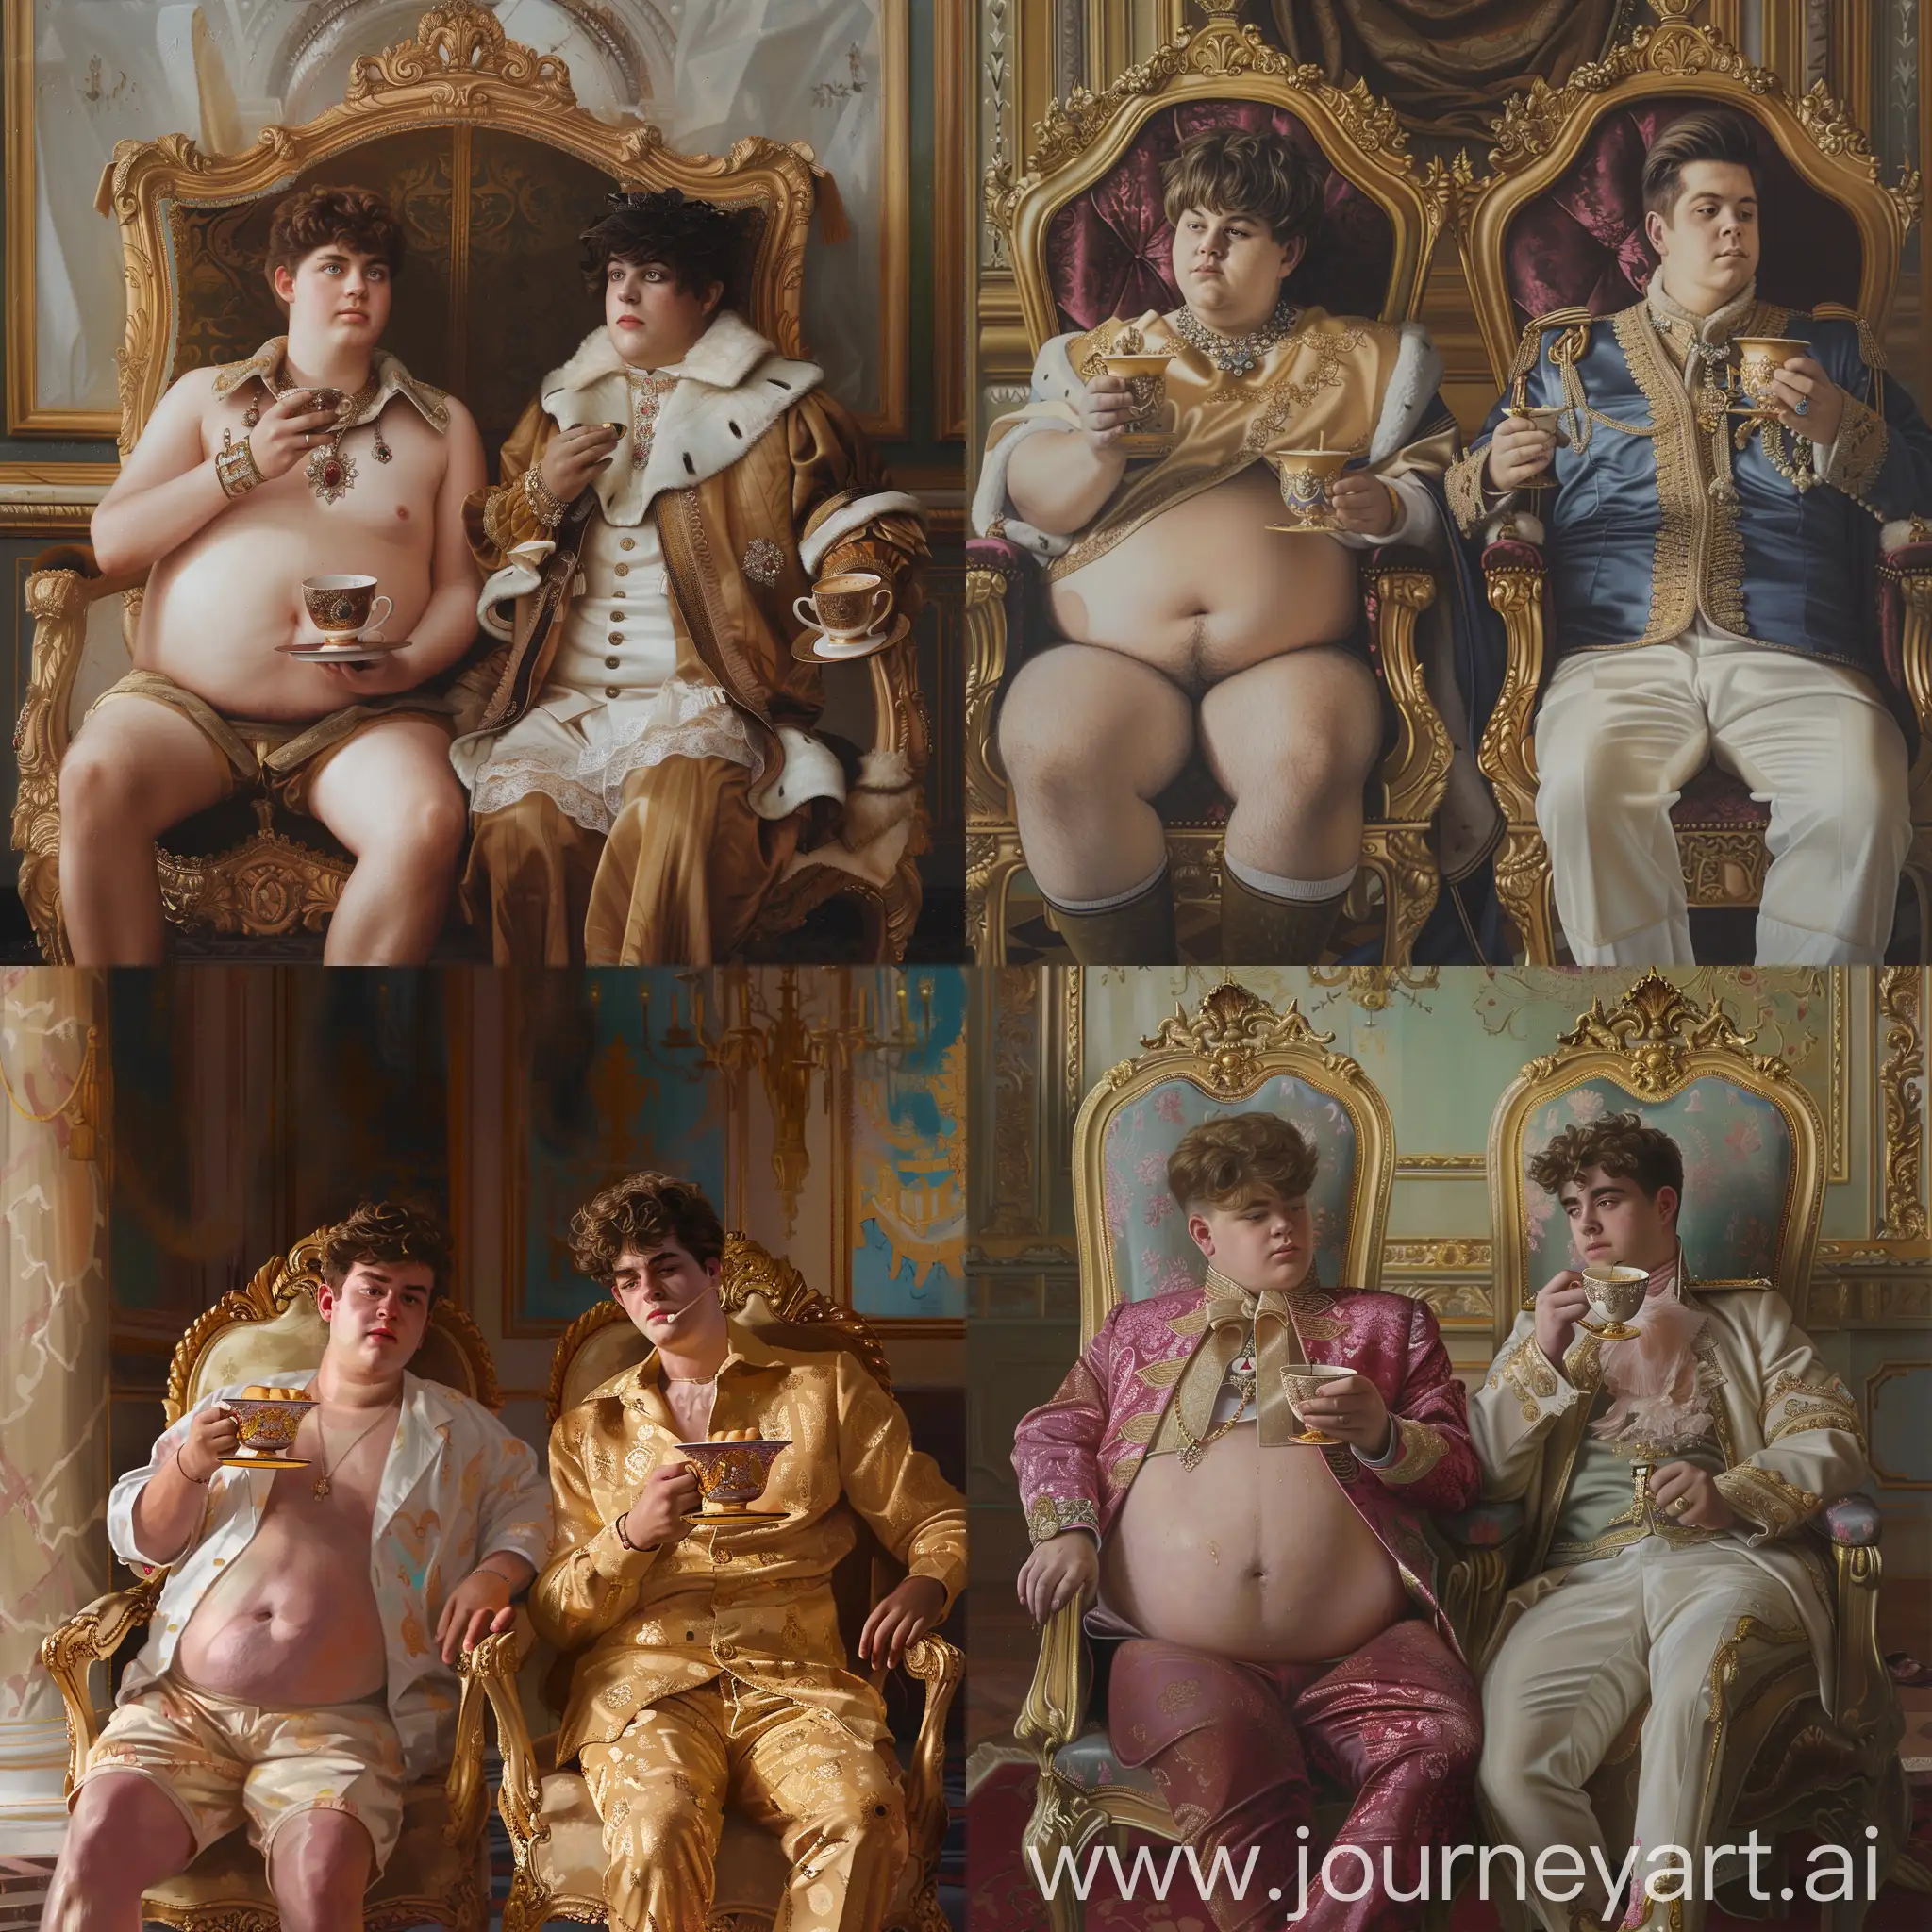 Royal realistic art: two young gays (one of them really fat). both sitting in royal chairs and drinking coffee from royal cups. Location: royal palace